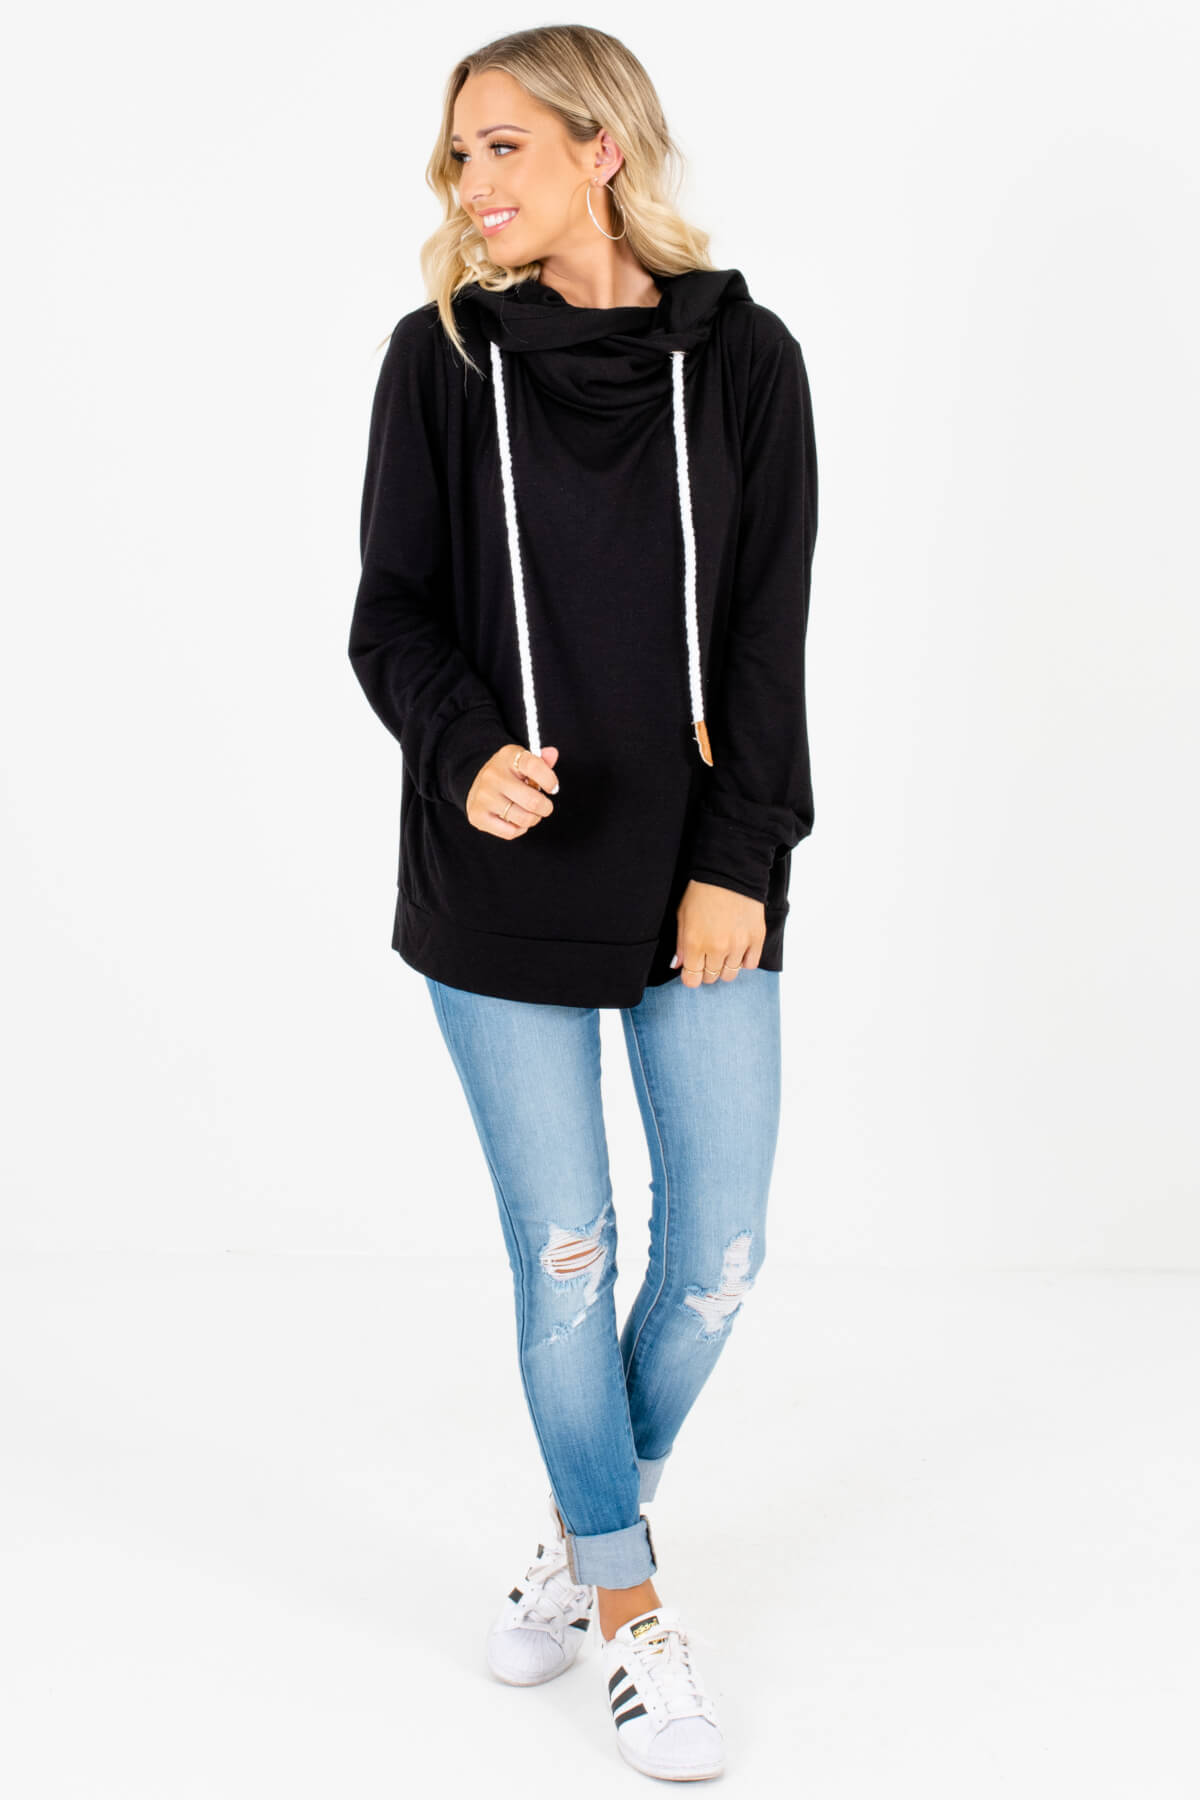 Women's Black Cozy and Warm Boutique Clothing